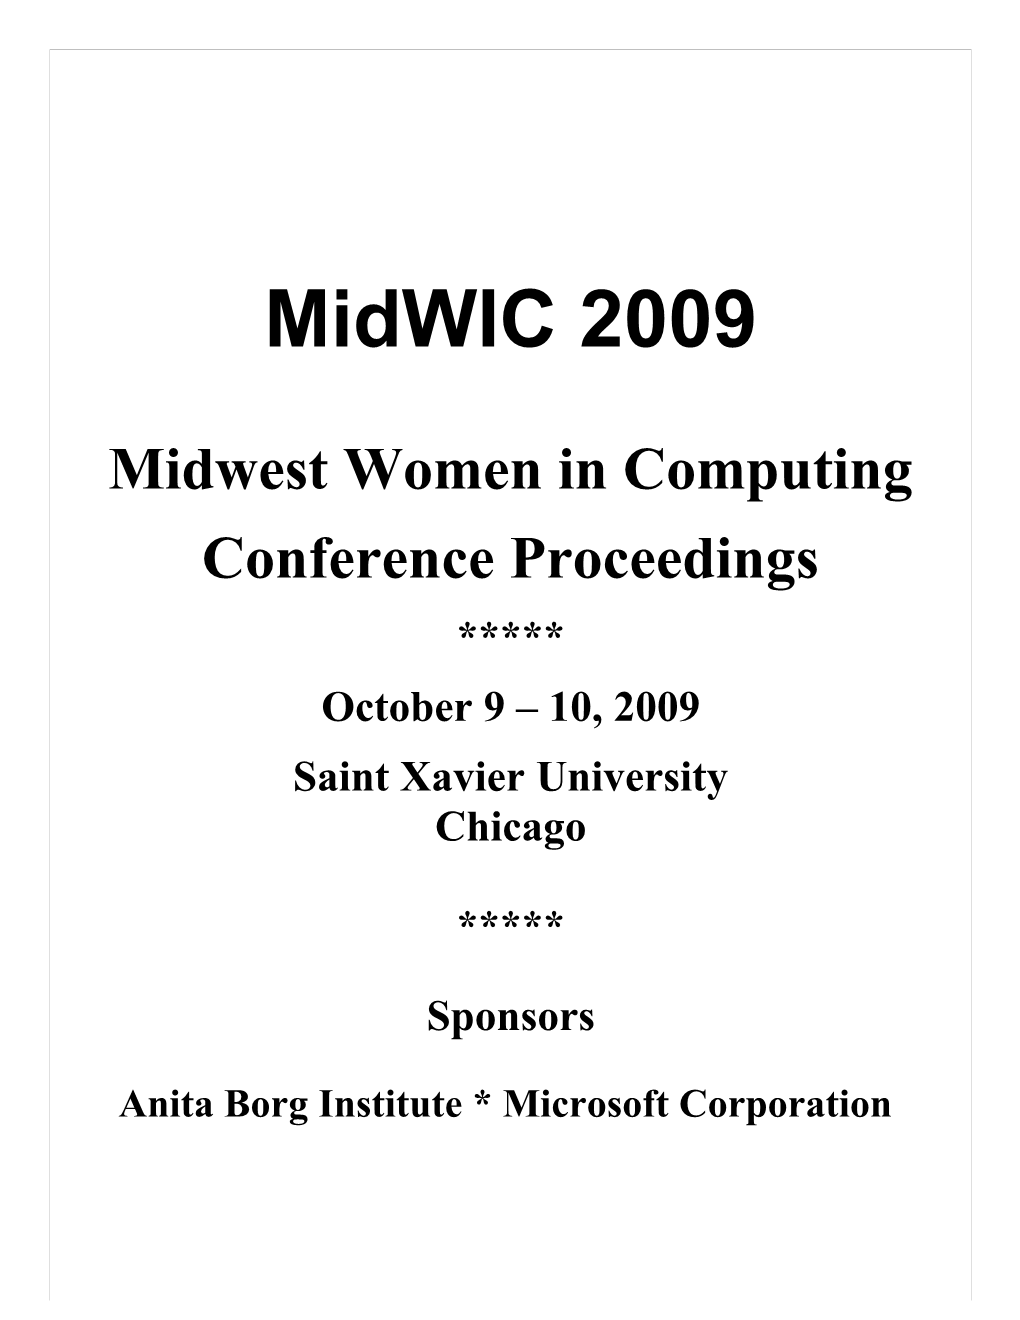 Midwic Conference Proceedings